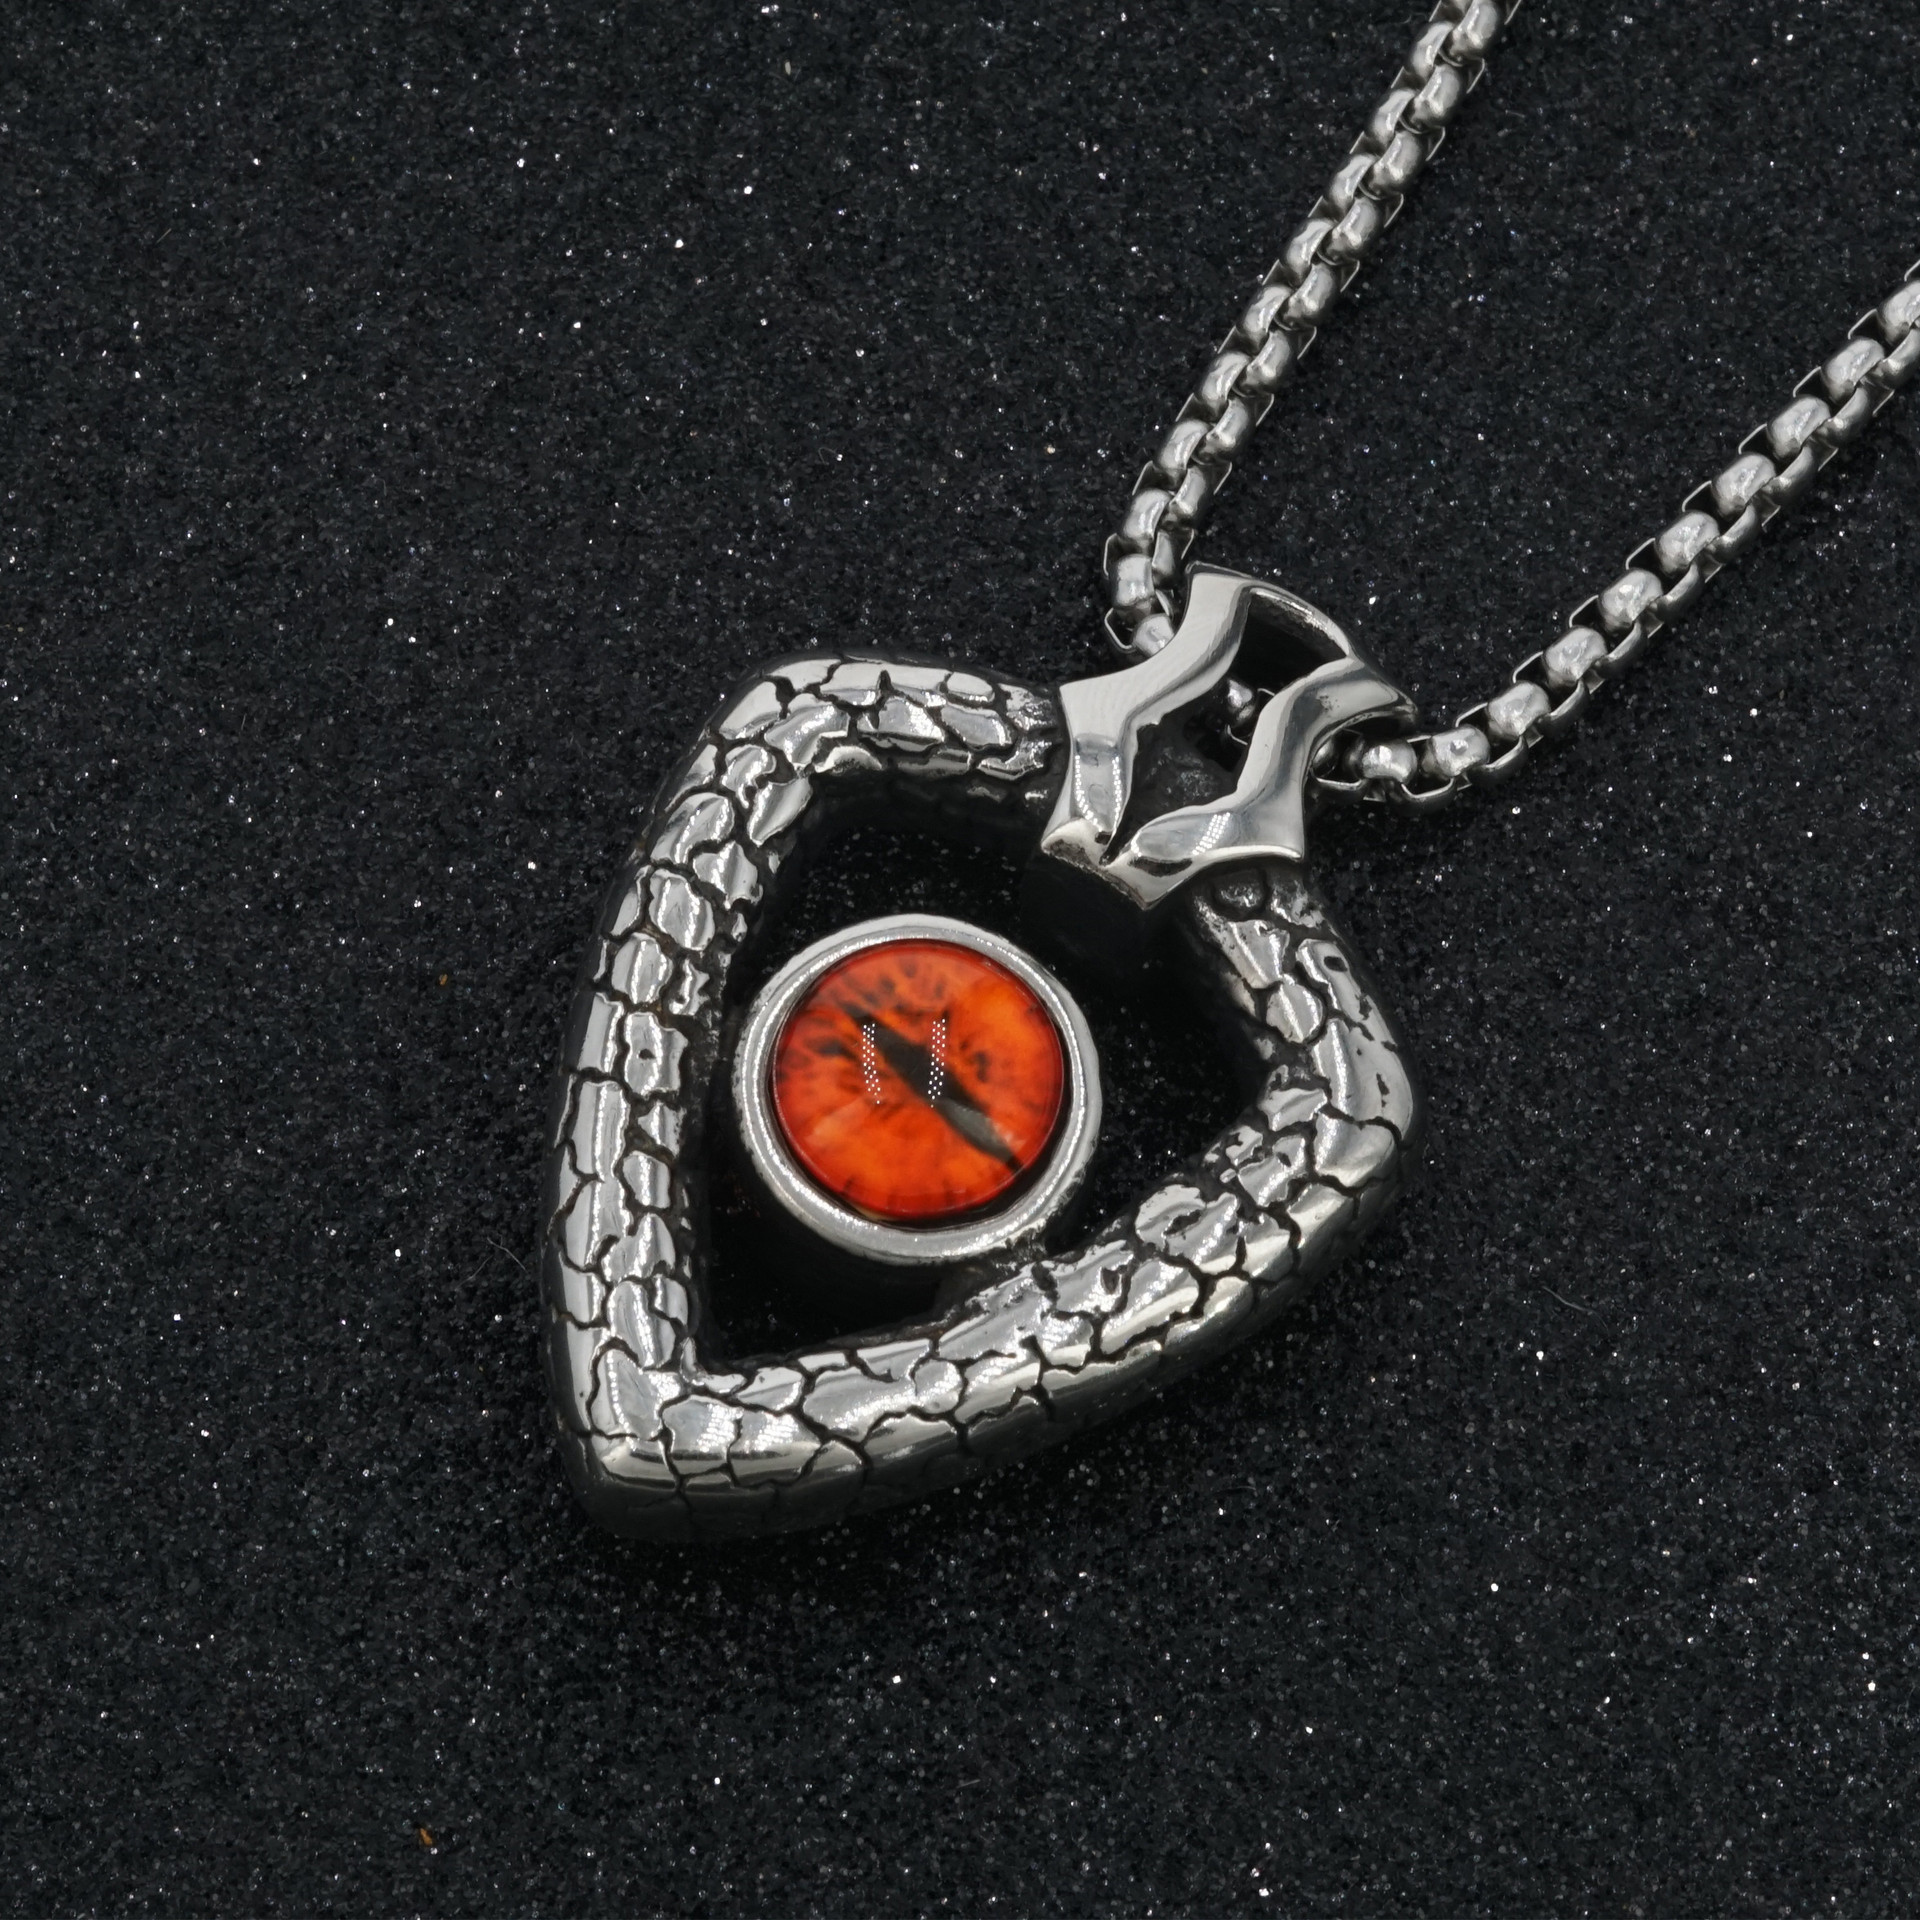 3:Red Eye single pendant without chain